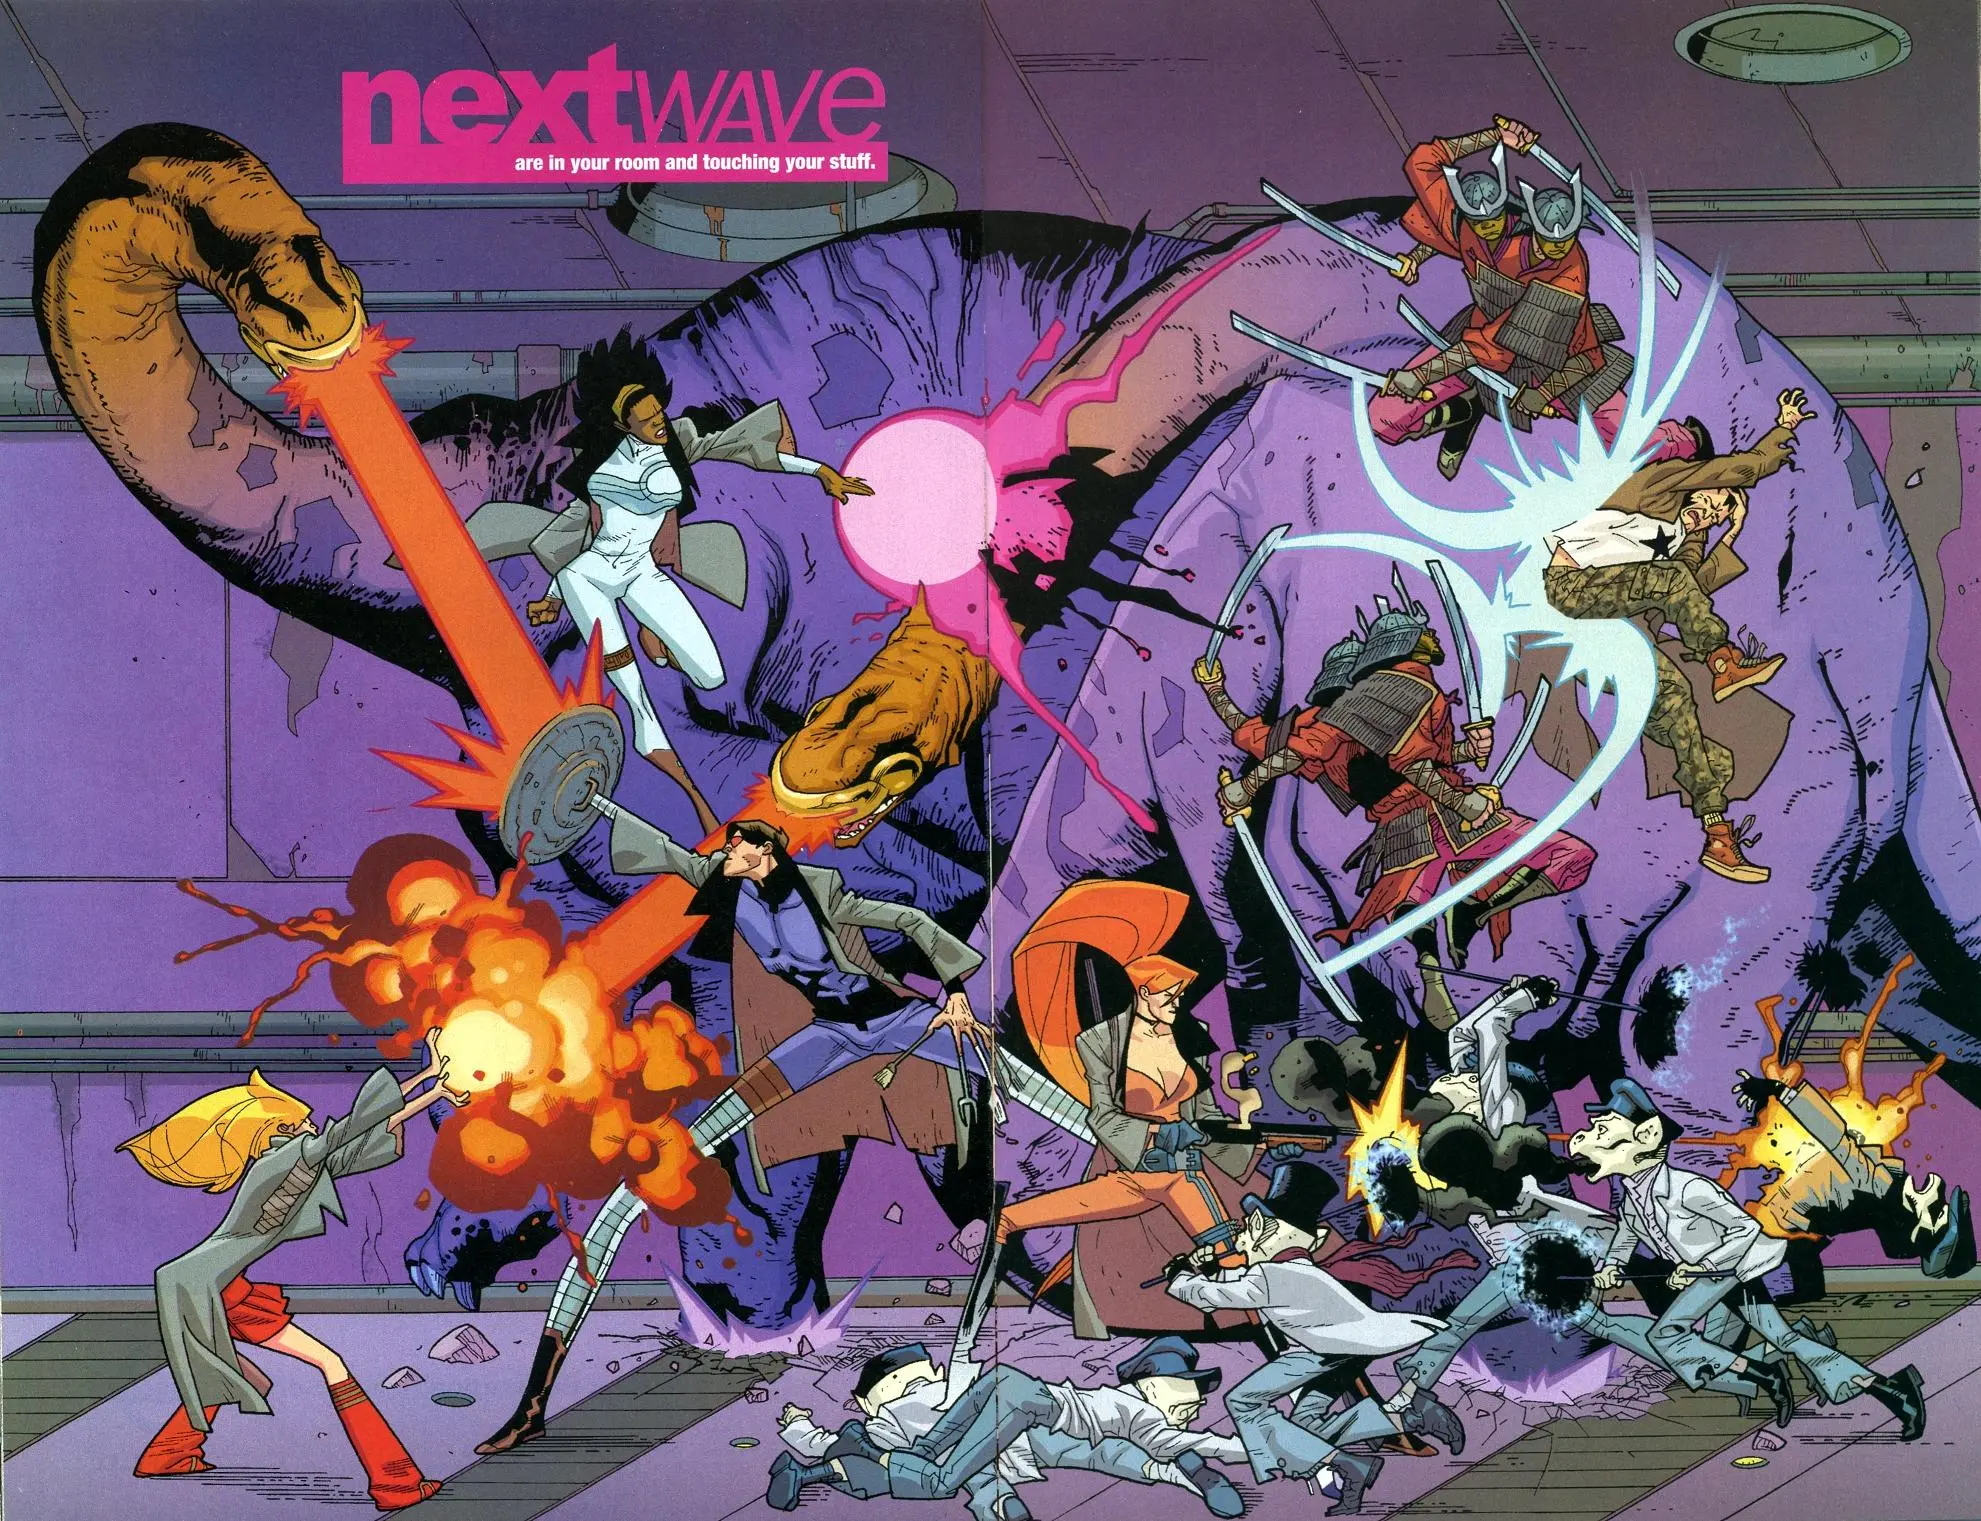 Comic cover of 'Nextwave' with energetic characters in action, one holding a pink energy staff, against a backdrop of vibrant